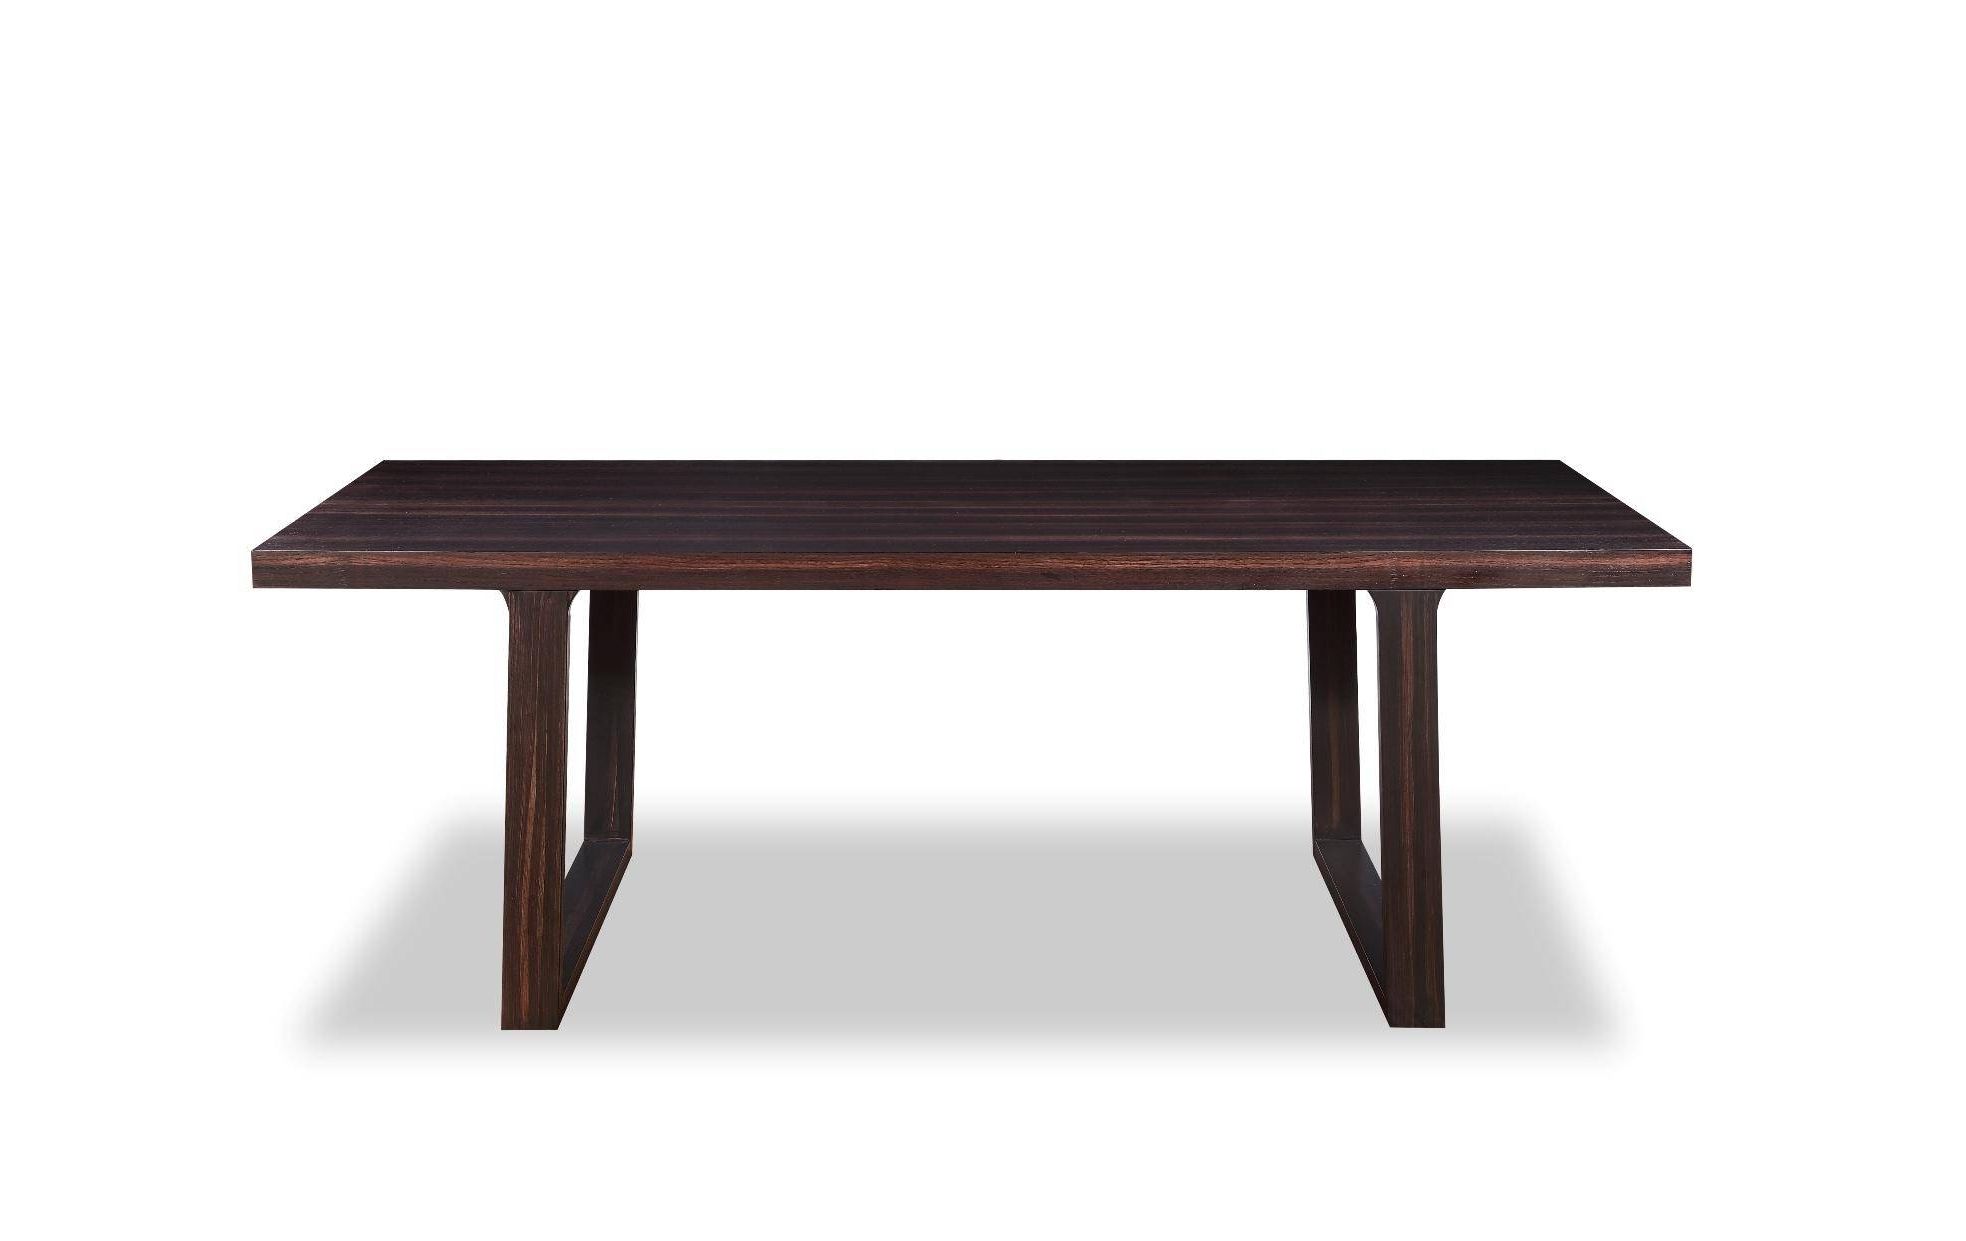 Contemporary Rectangular Dining Tables Intended For Well Known Vig A&x Caligari Oak Veneer Rectangular Dining Table (View 24 of 30)